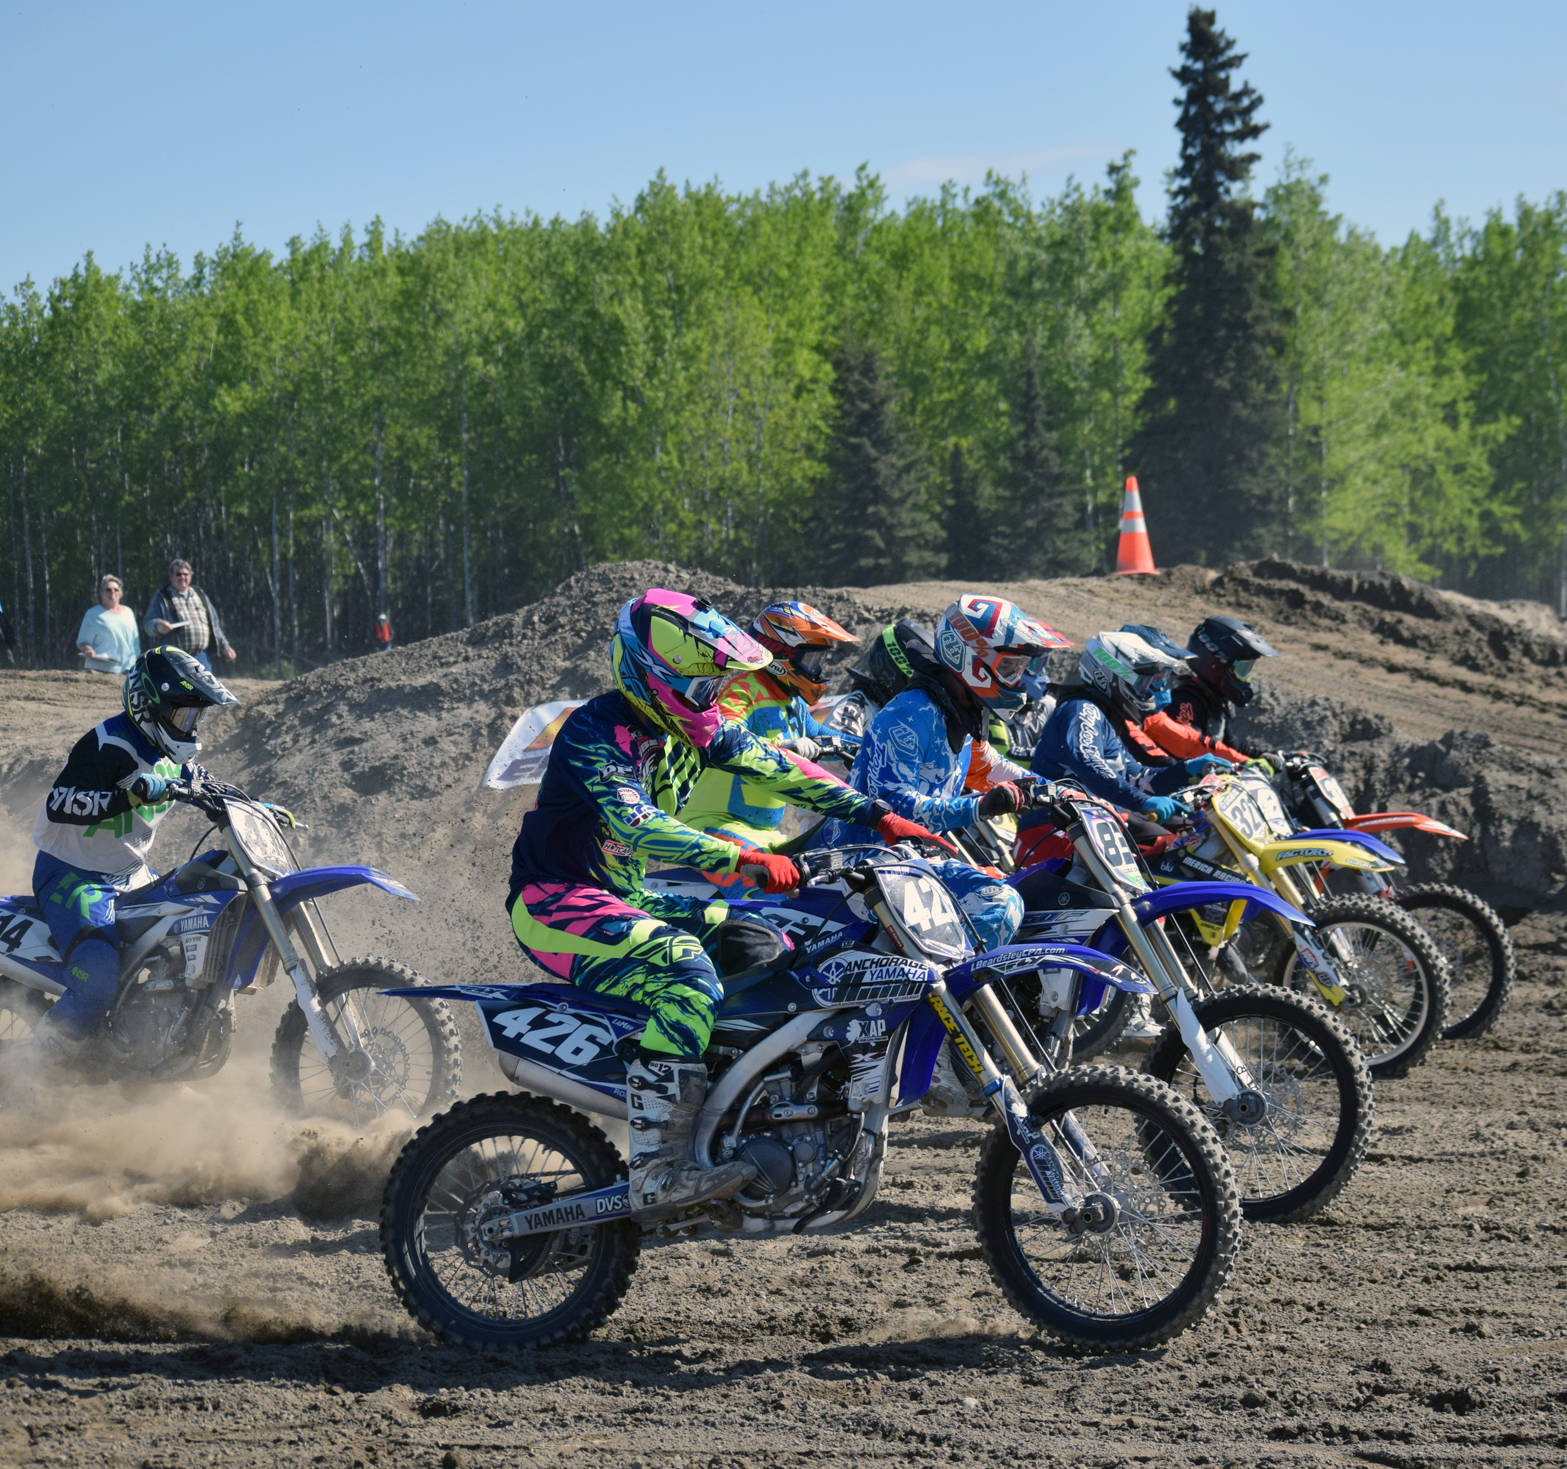 Ben LaMay (426) races to a lead at the start of the Pro race Saturday, June 17, 2017, at the Alaska State Motocross Championships at Twin City Raceway in Kenai. (Photo by Jeff Helminiak/Peninsula Clarion)